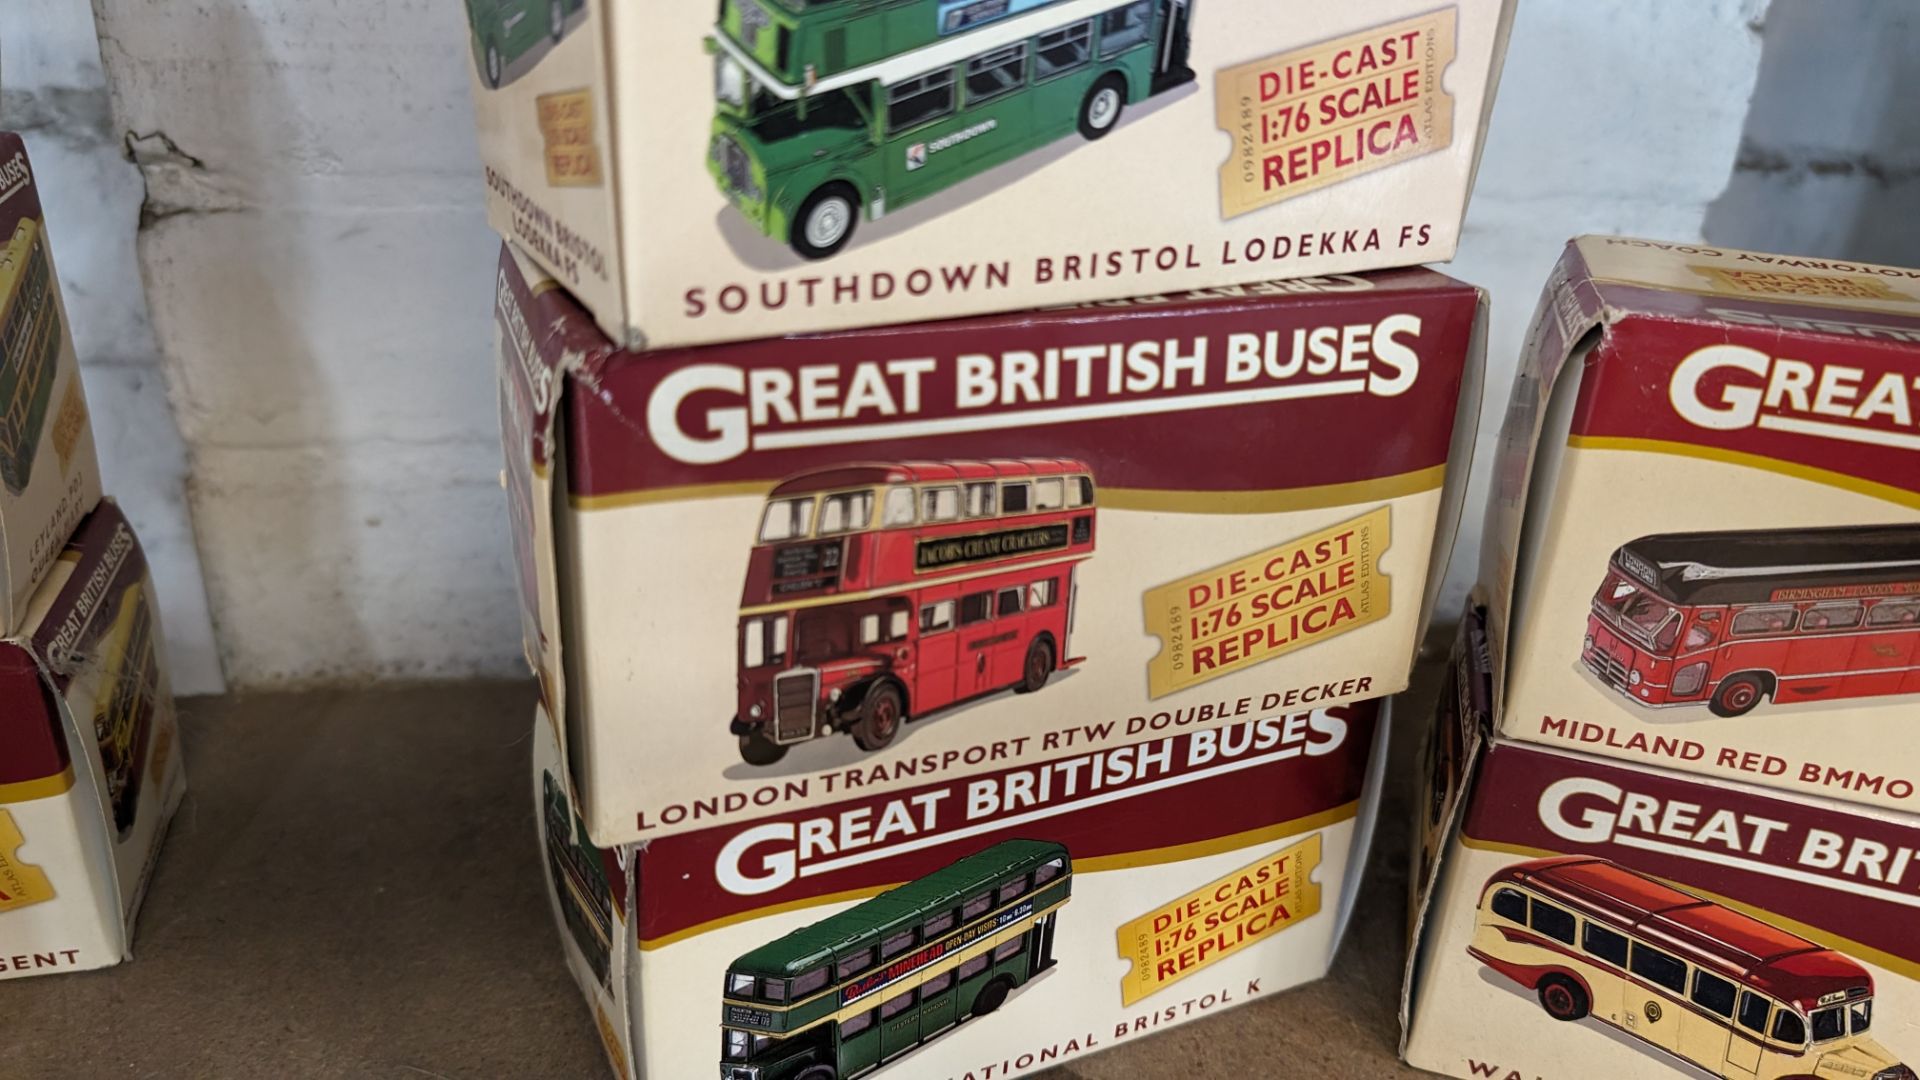 5 assorted Great British Buses die-cast replica buses, 1:76 scale - Image 4 of 9